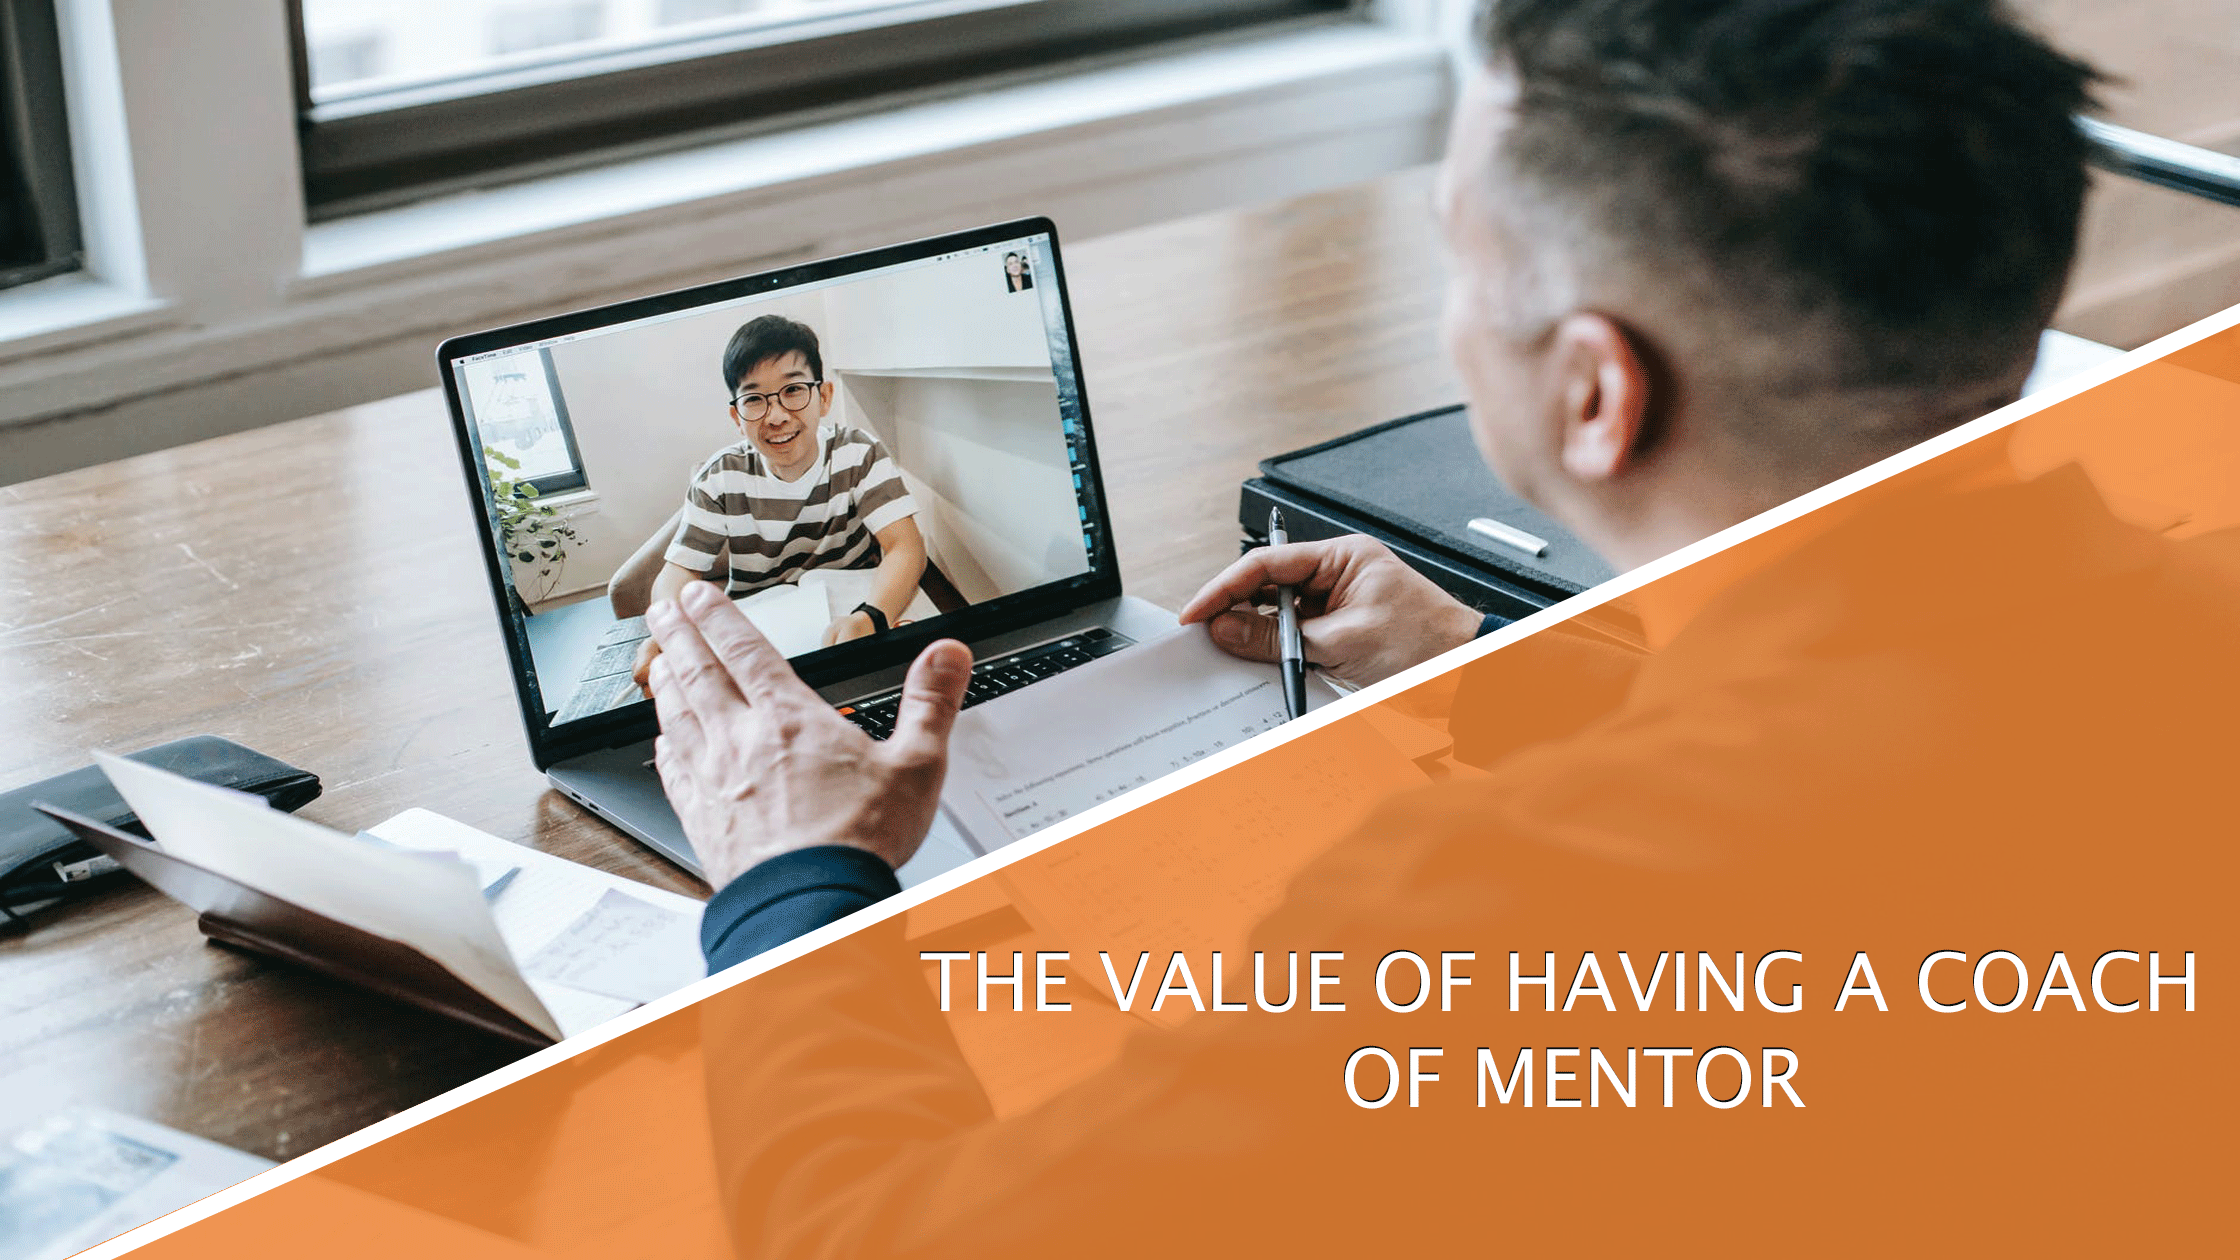 The value of having a coach or mentor